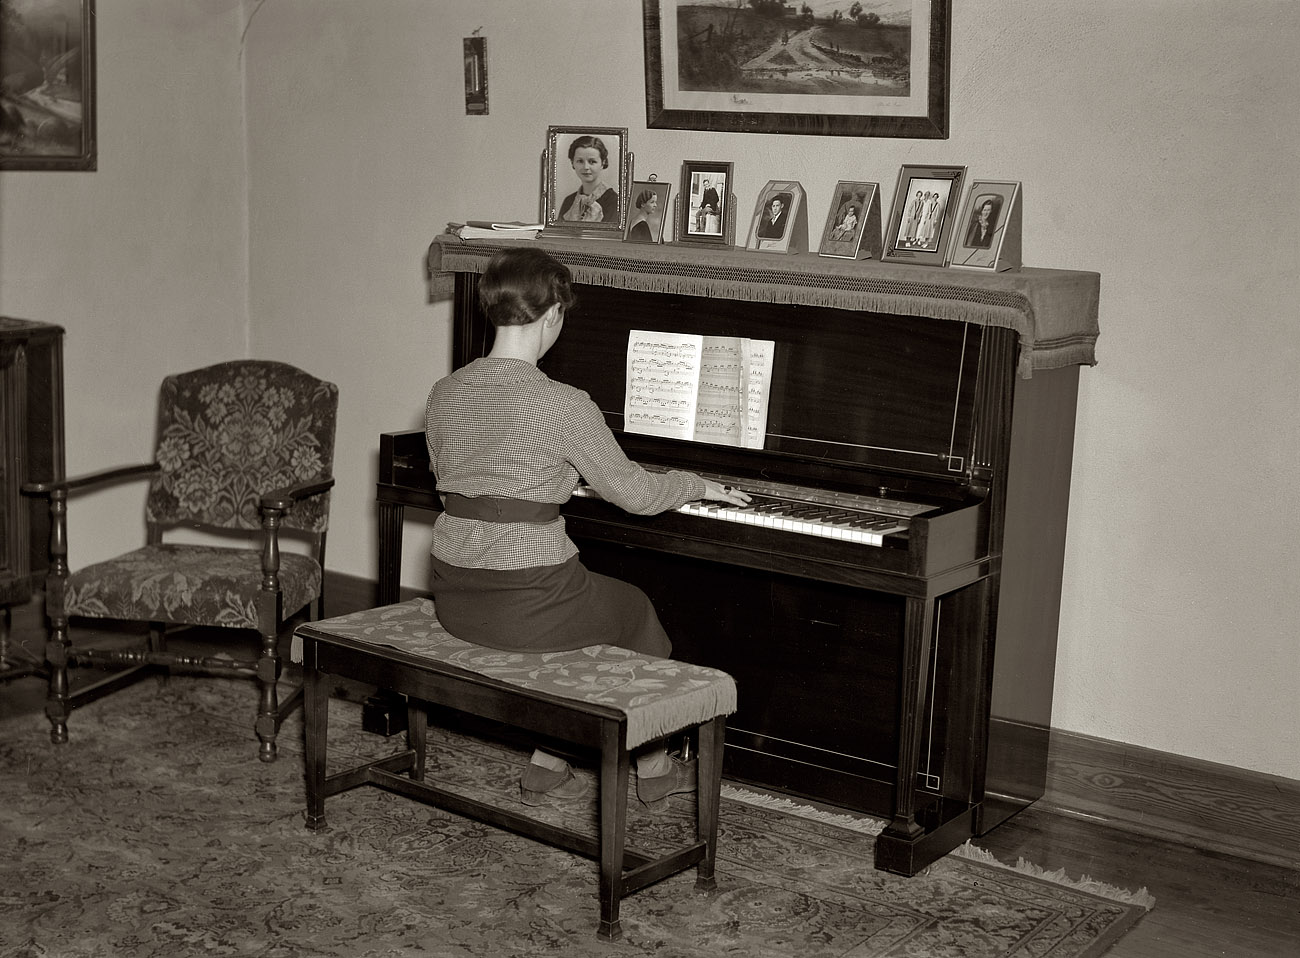 December 1936. "Lois Madsen playing the piano in the home of her father, Harry Madsen, owner-operator of three hundred and sixty acre farm near Dickens, Iowa. (Suggest this as contrast showing difference in opportunity offered children in owner-operated farms and that offered in poorer tenant or hired hand homes)." View full size. Medium format nitrate negative by Russell Lee.